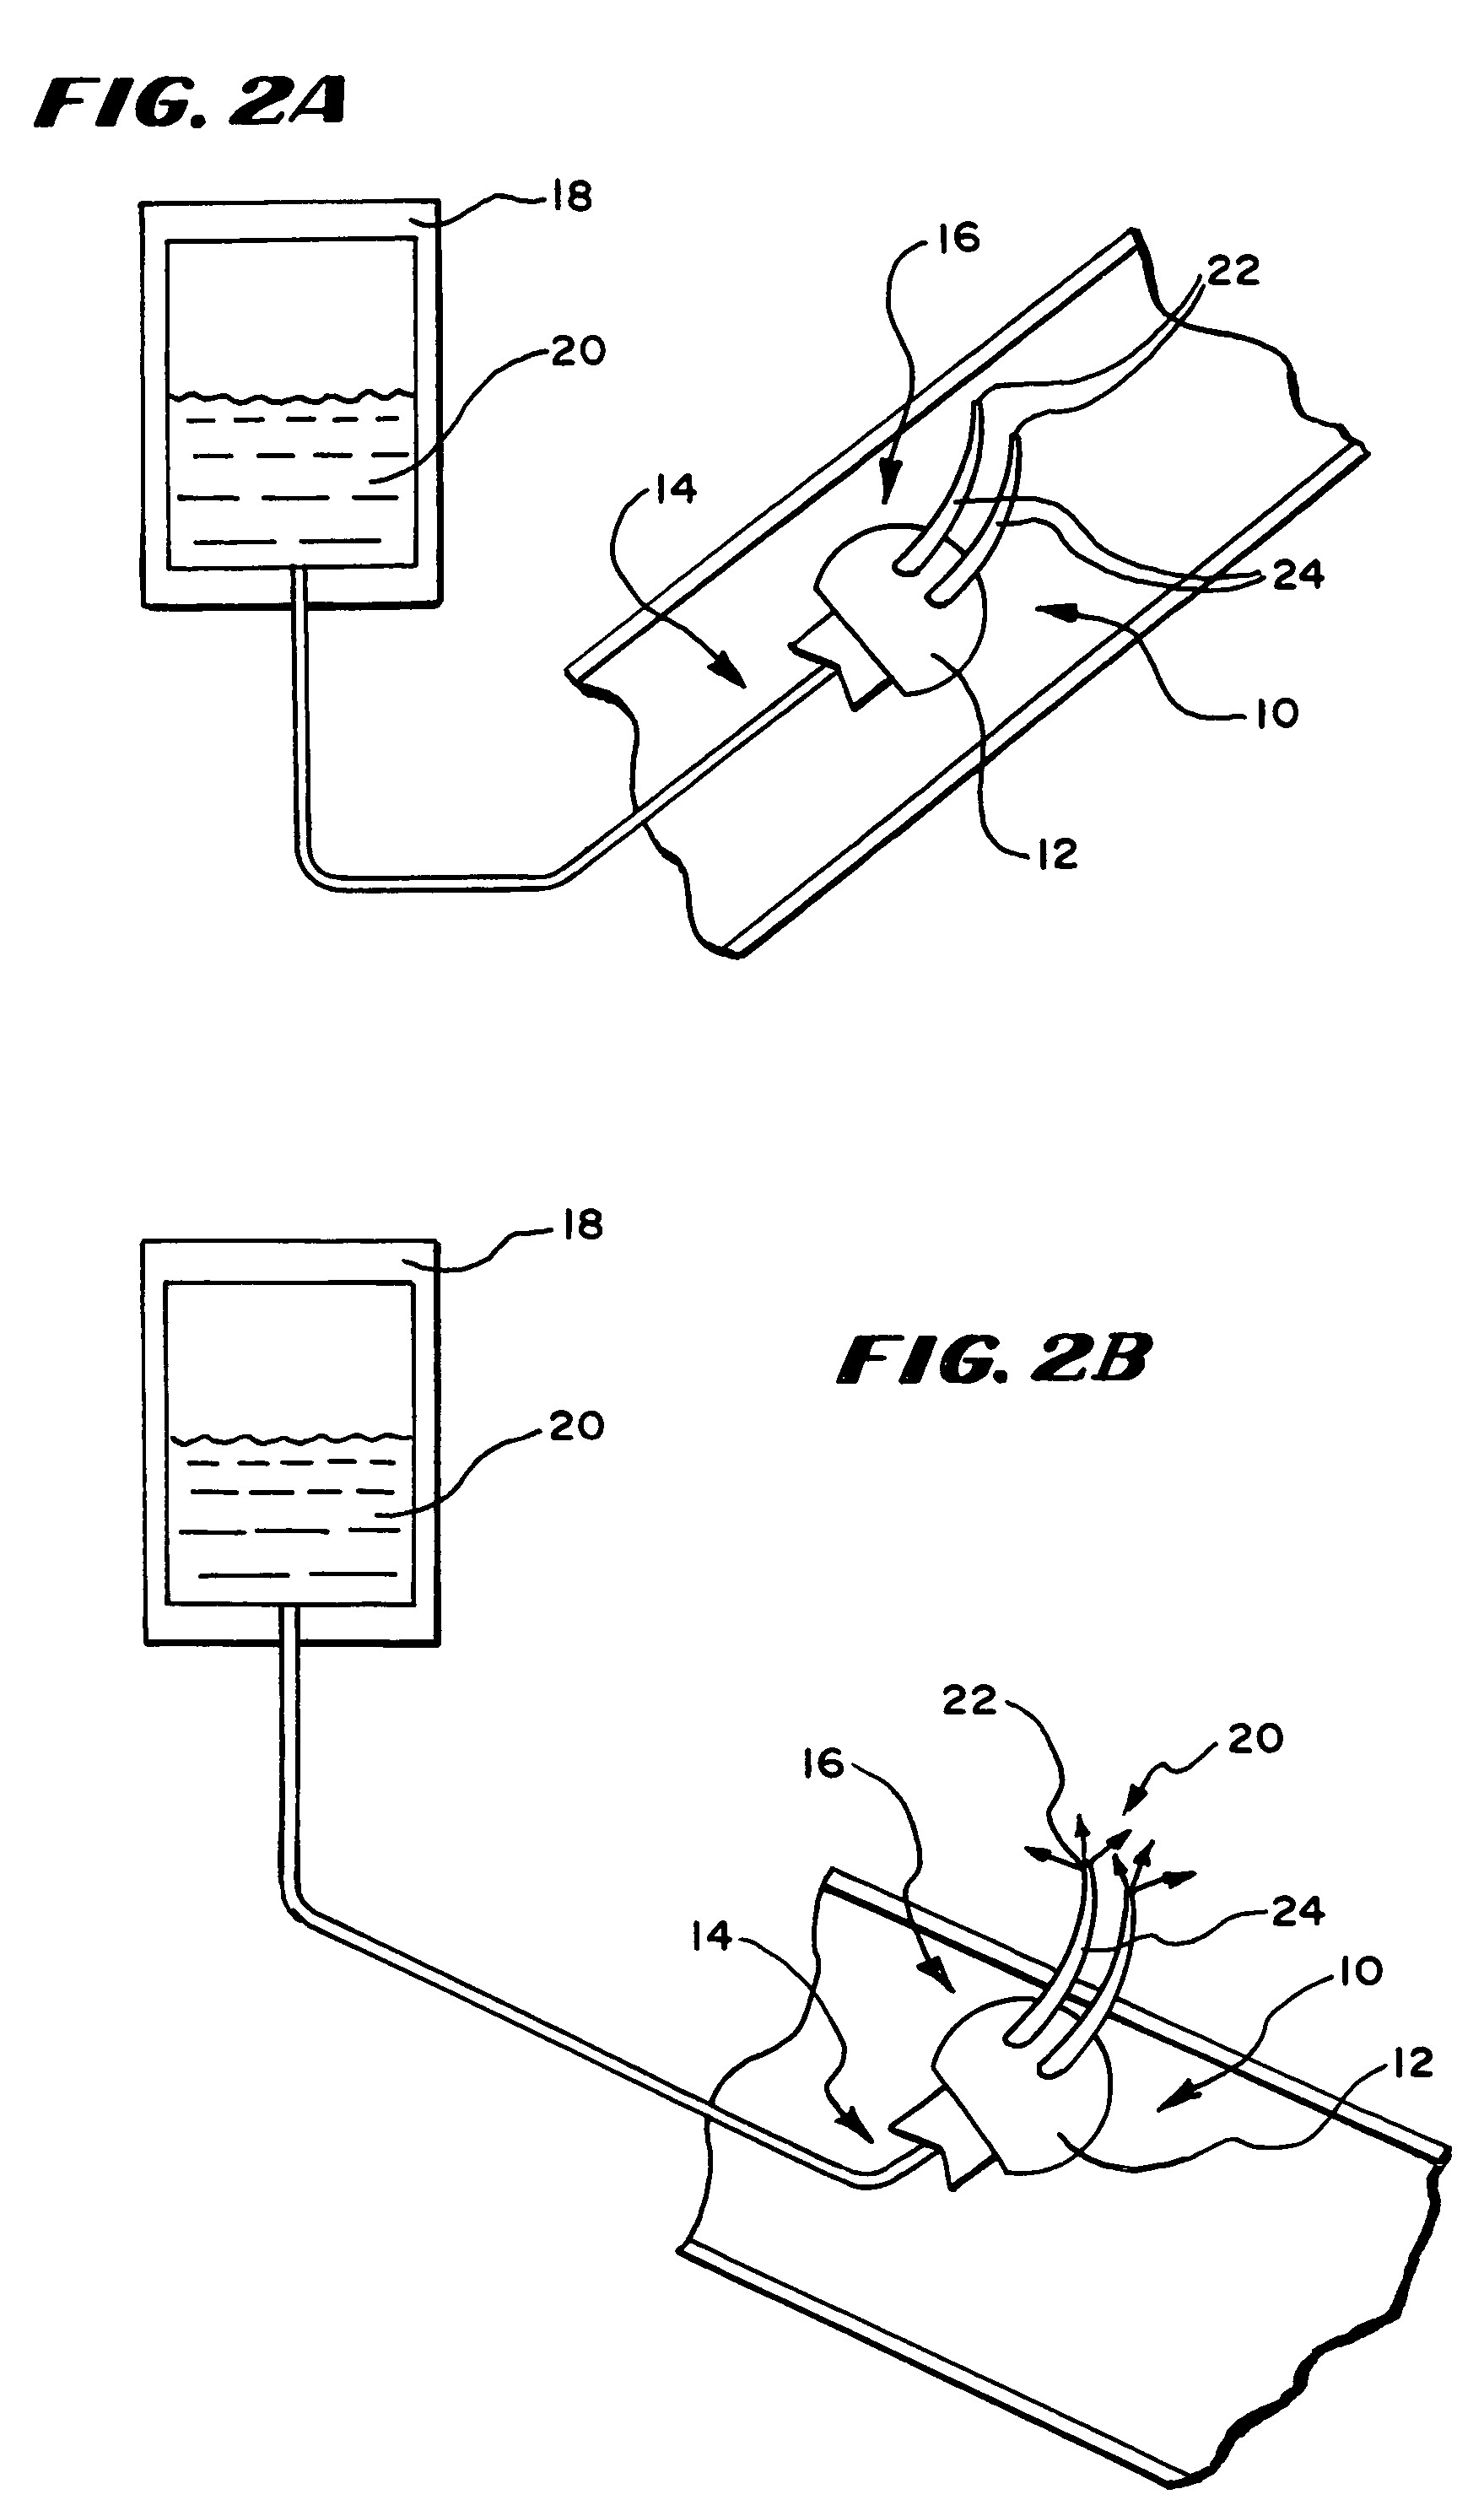 Systems and methods for applying a selected treatment agent into contact with tissue to treat disorders of the gastrointestinal tract